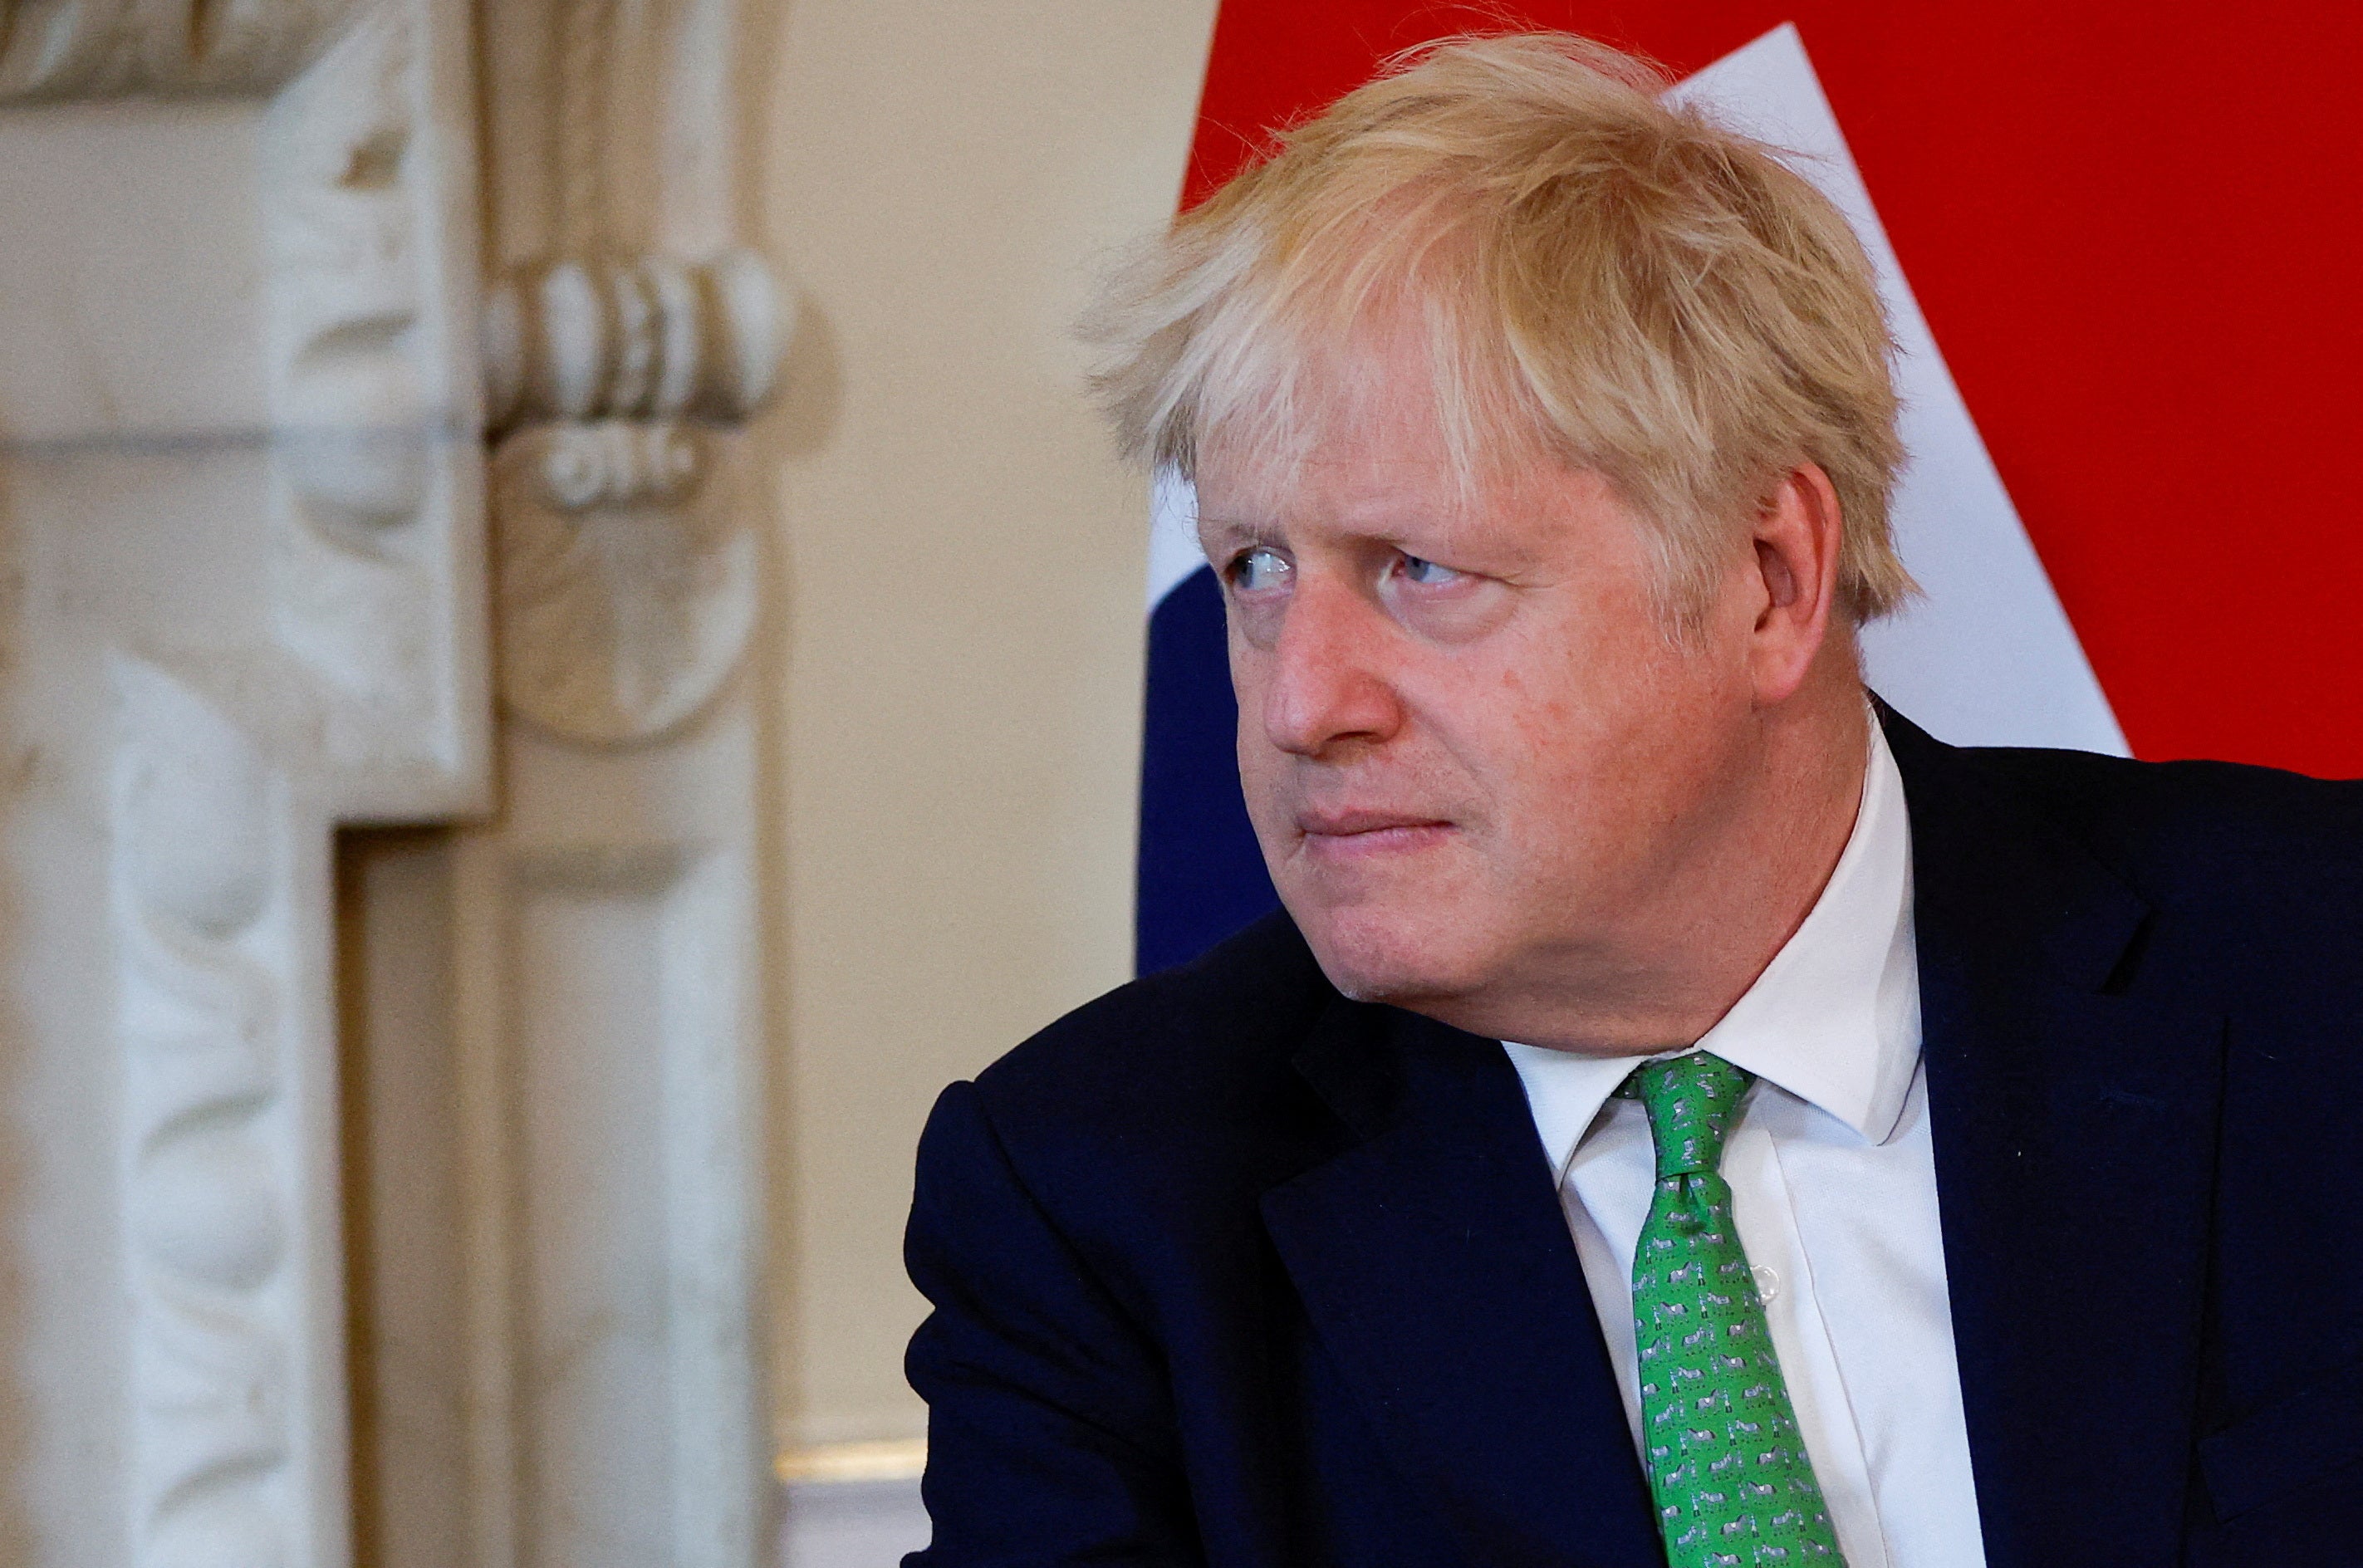 Boris Johnson had a call with a Tory MP which allegedly pushed him to suspend Chris Pincher